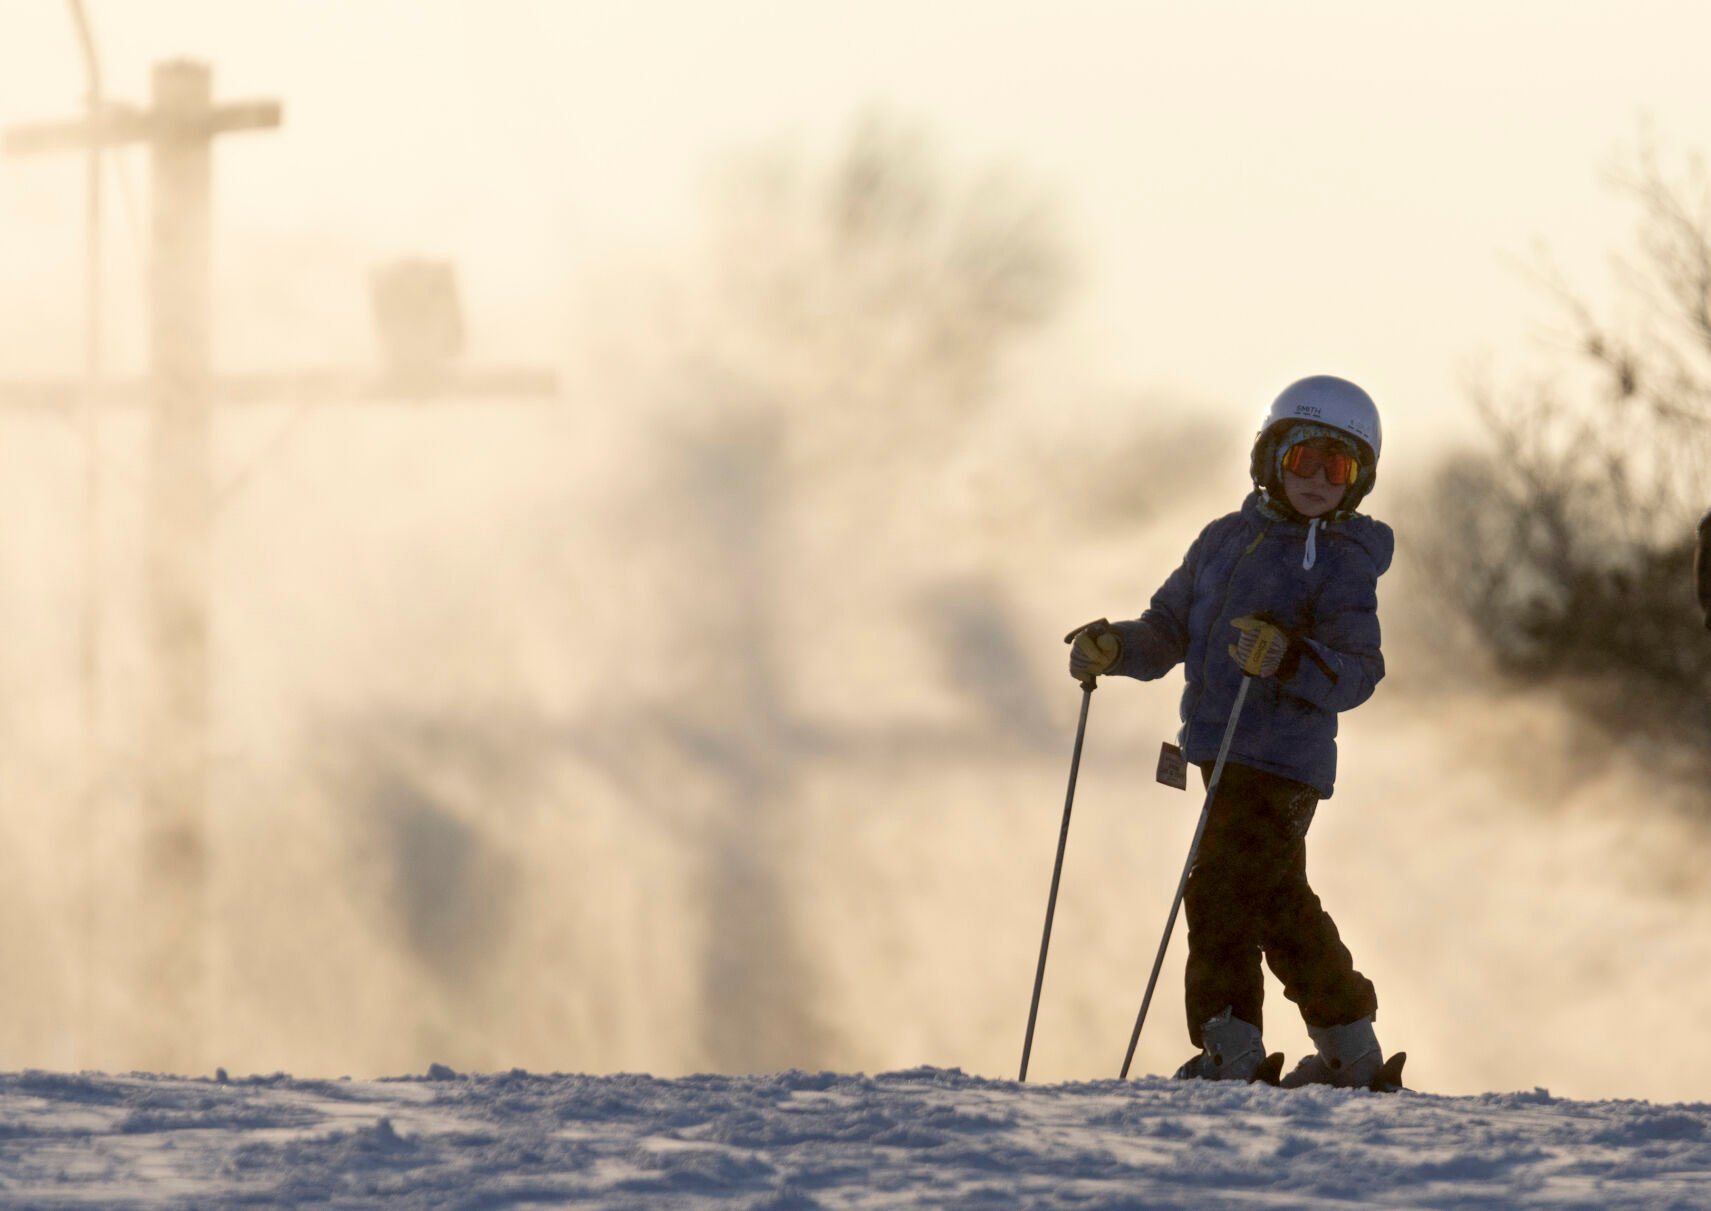 A young skier on top of one of the runs as man-made snow swirls in the background.    PHOTO CREDIT: Stephen Gassman